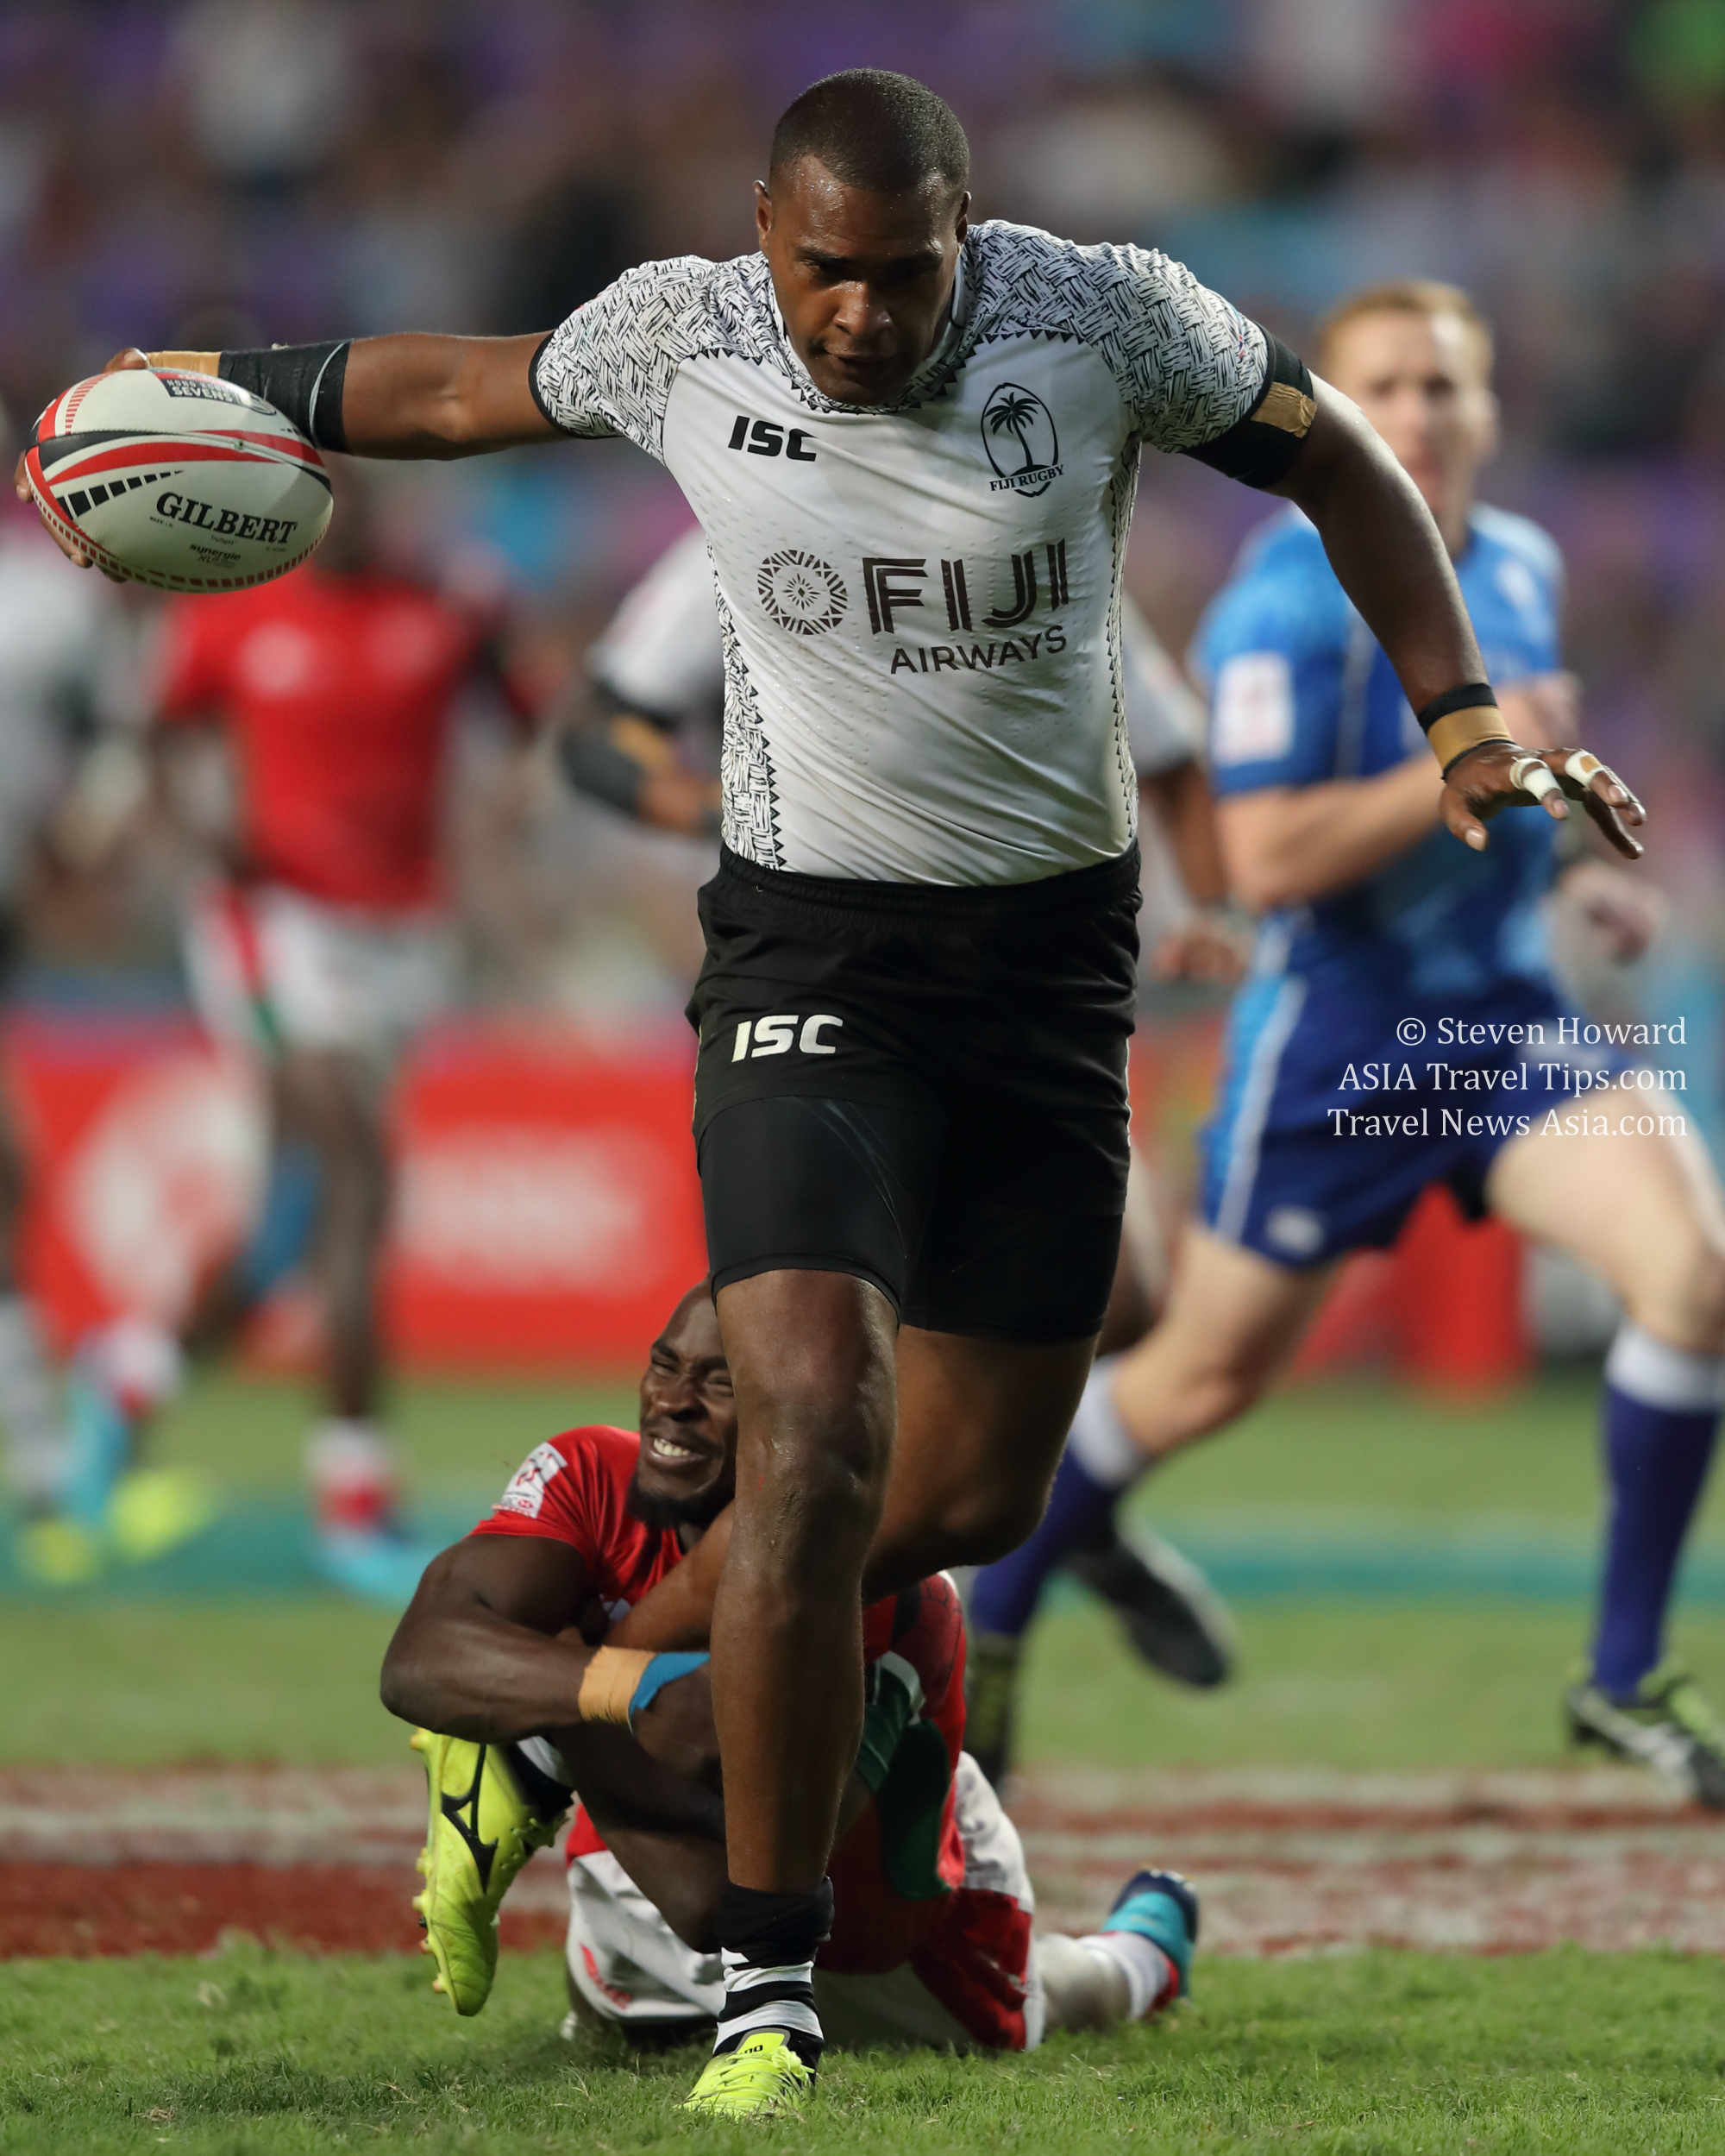 Can Fiji win five Hong Kong Sevens tournaments in a row?! Action from last year's Fiji vs Kenya Final at the Cathay Pacific / HSBC Hong Kong Sevens. Picture by Steven Howard of TravelNewsAsia.com Click to enlarge.